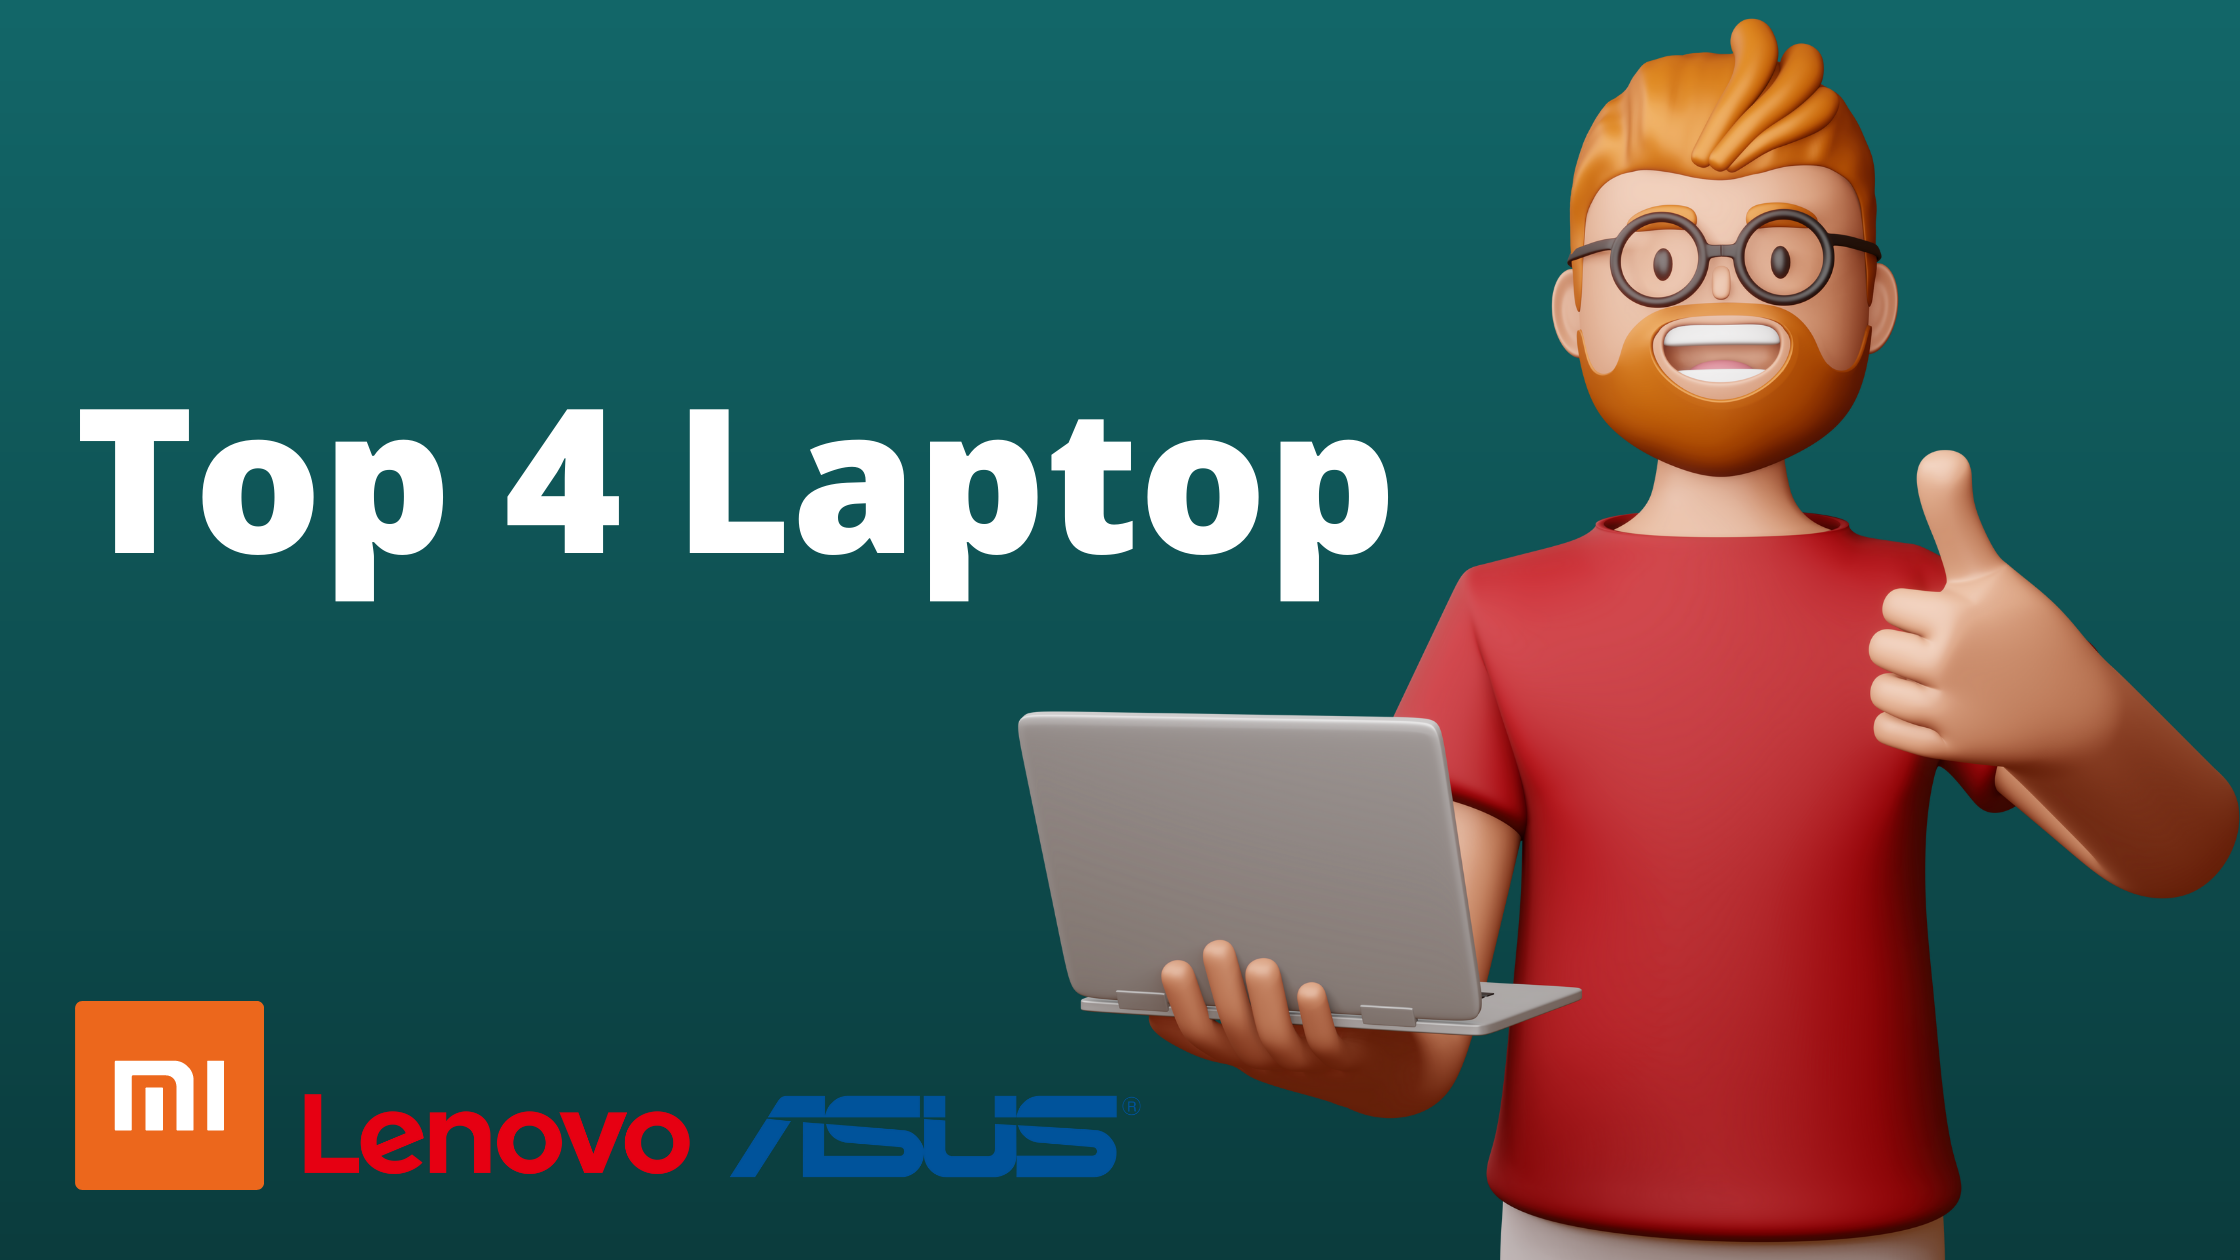 Bumper discount on Top 4 Laptop of up to Rs 23,000 on these laptops, here's the offer and price